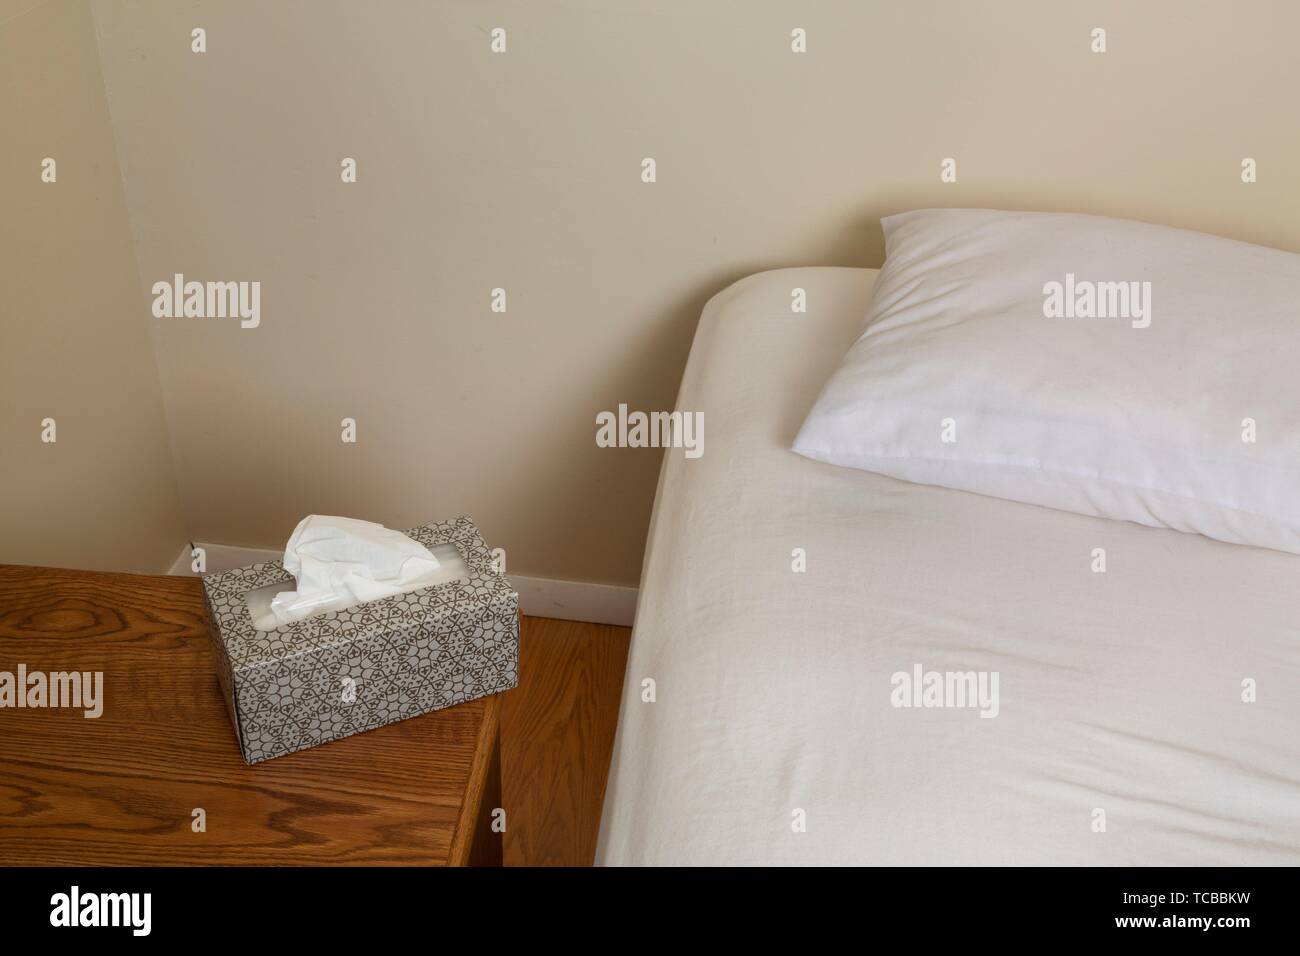 Empty unmade bed and a night table with a box of facial tissues on it. Stock Photo